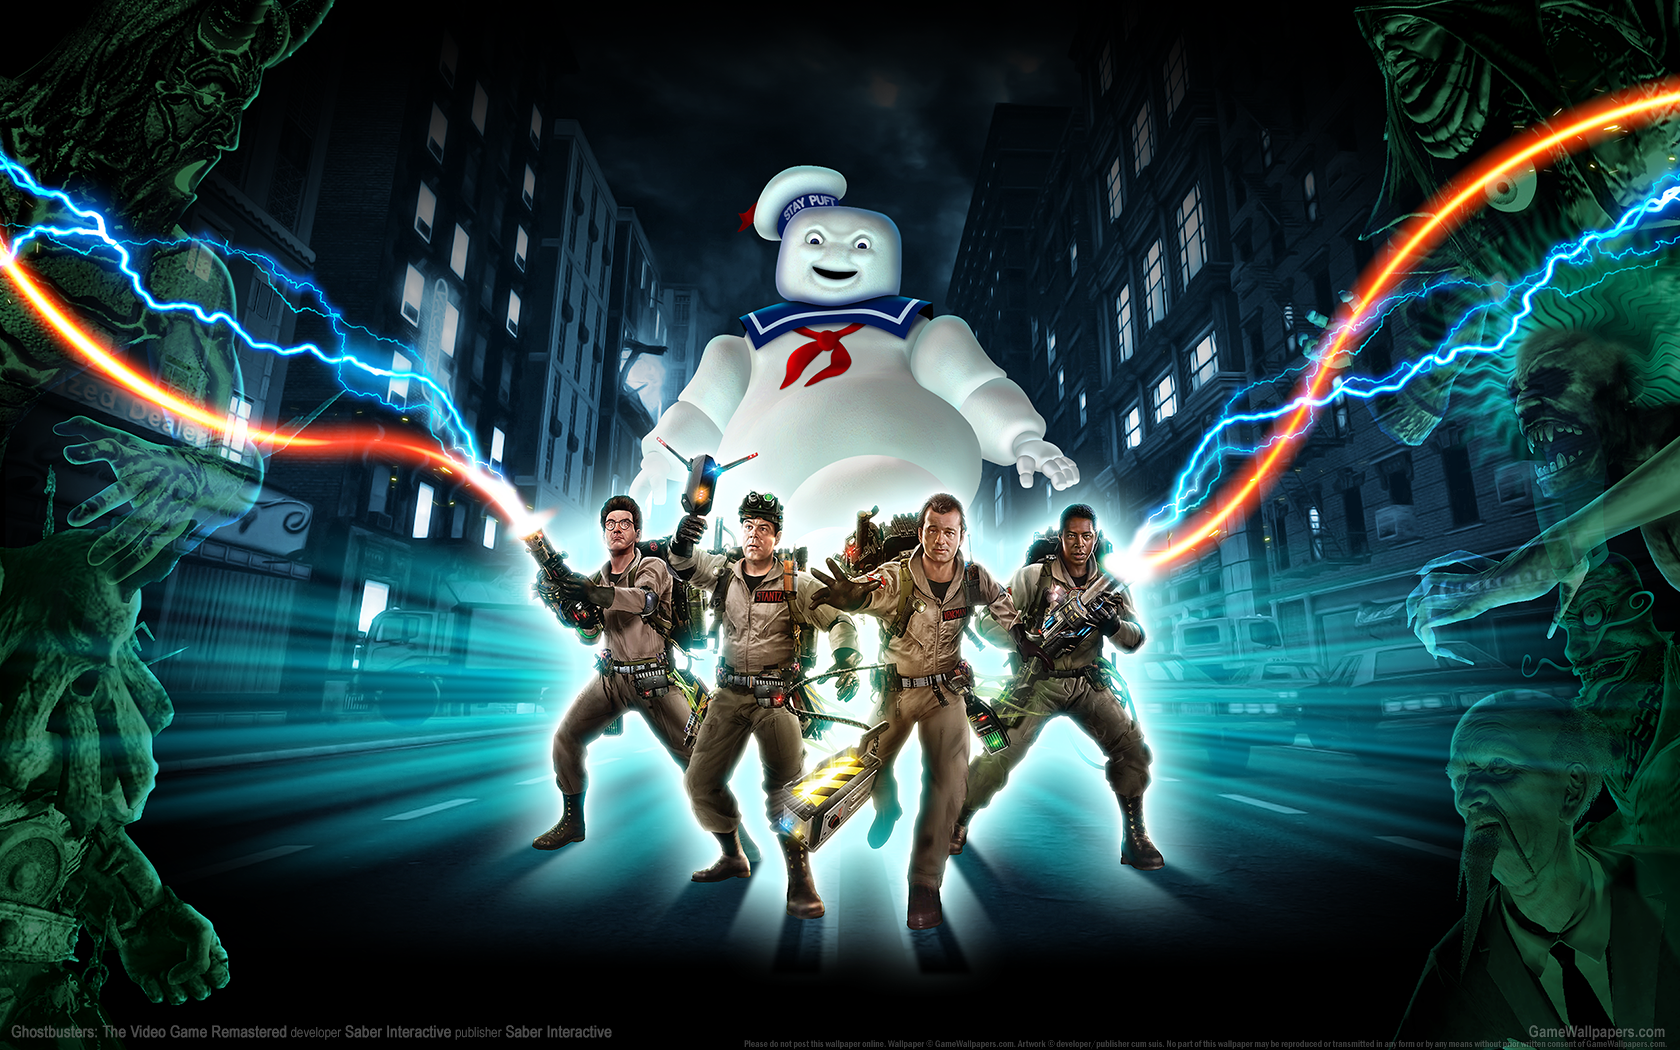 Ghostbusters: The Video Game Remastered 1680x1050 wallpaper or background 01